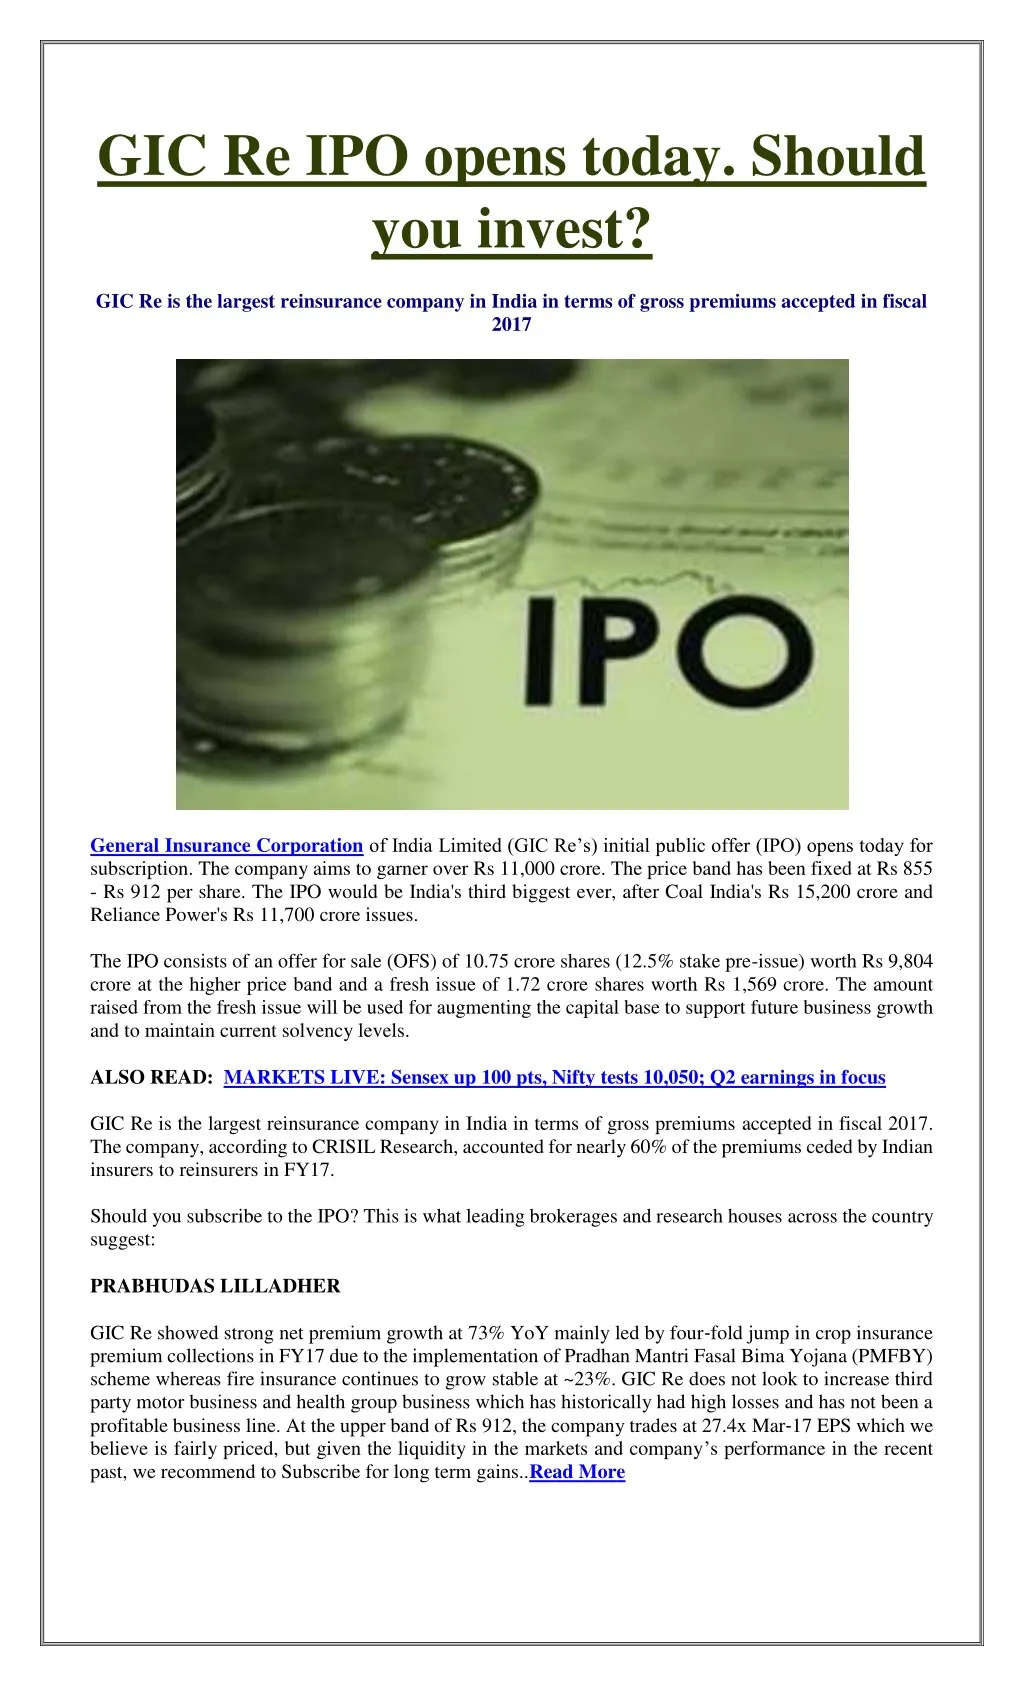 gic re ipo opens today should you invest